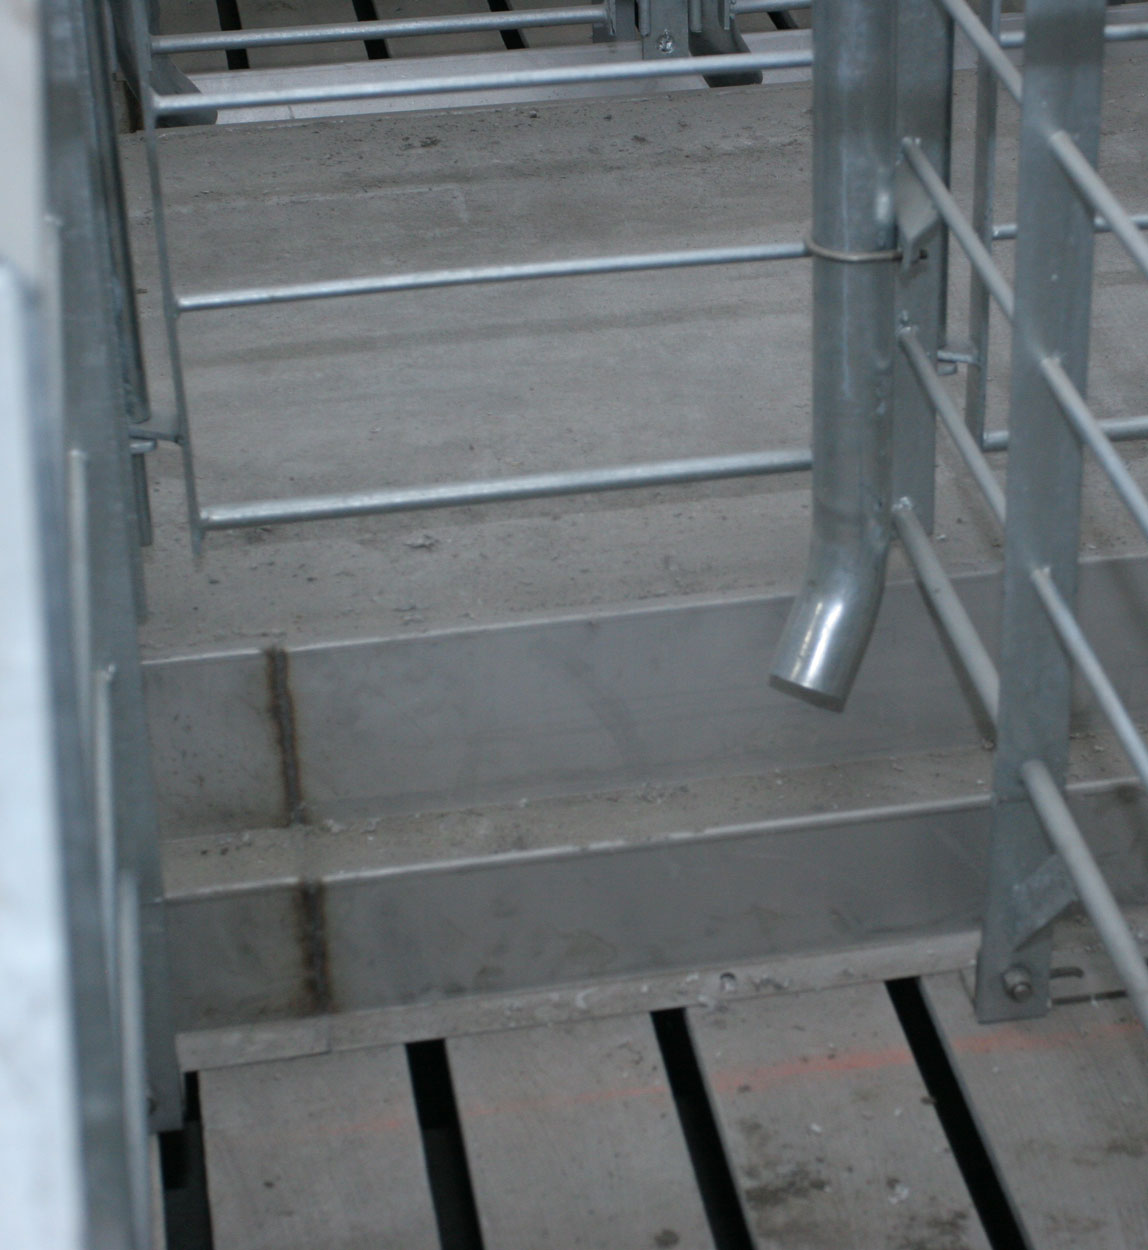 Stainless steel sow feeding trough can be integrated with stanchion installations to provide an easy to clean surface that helps reduce feed waste and allows feeding on total slat barns. Trough sections are field-welded together during installation on the farm and are available in several different designs to meet the needs of all stanchion system layouts.